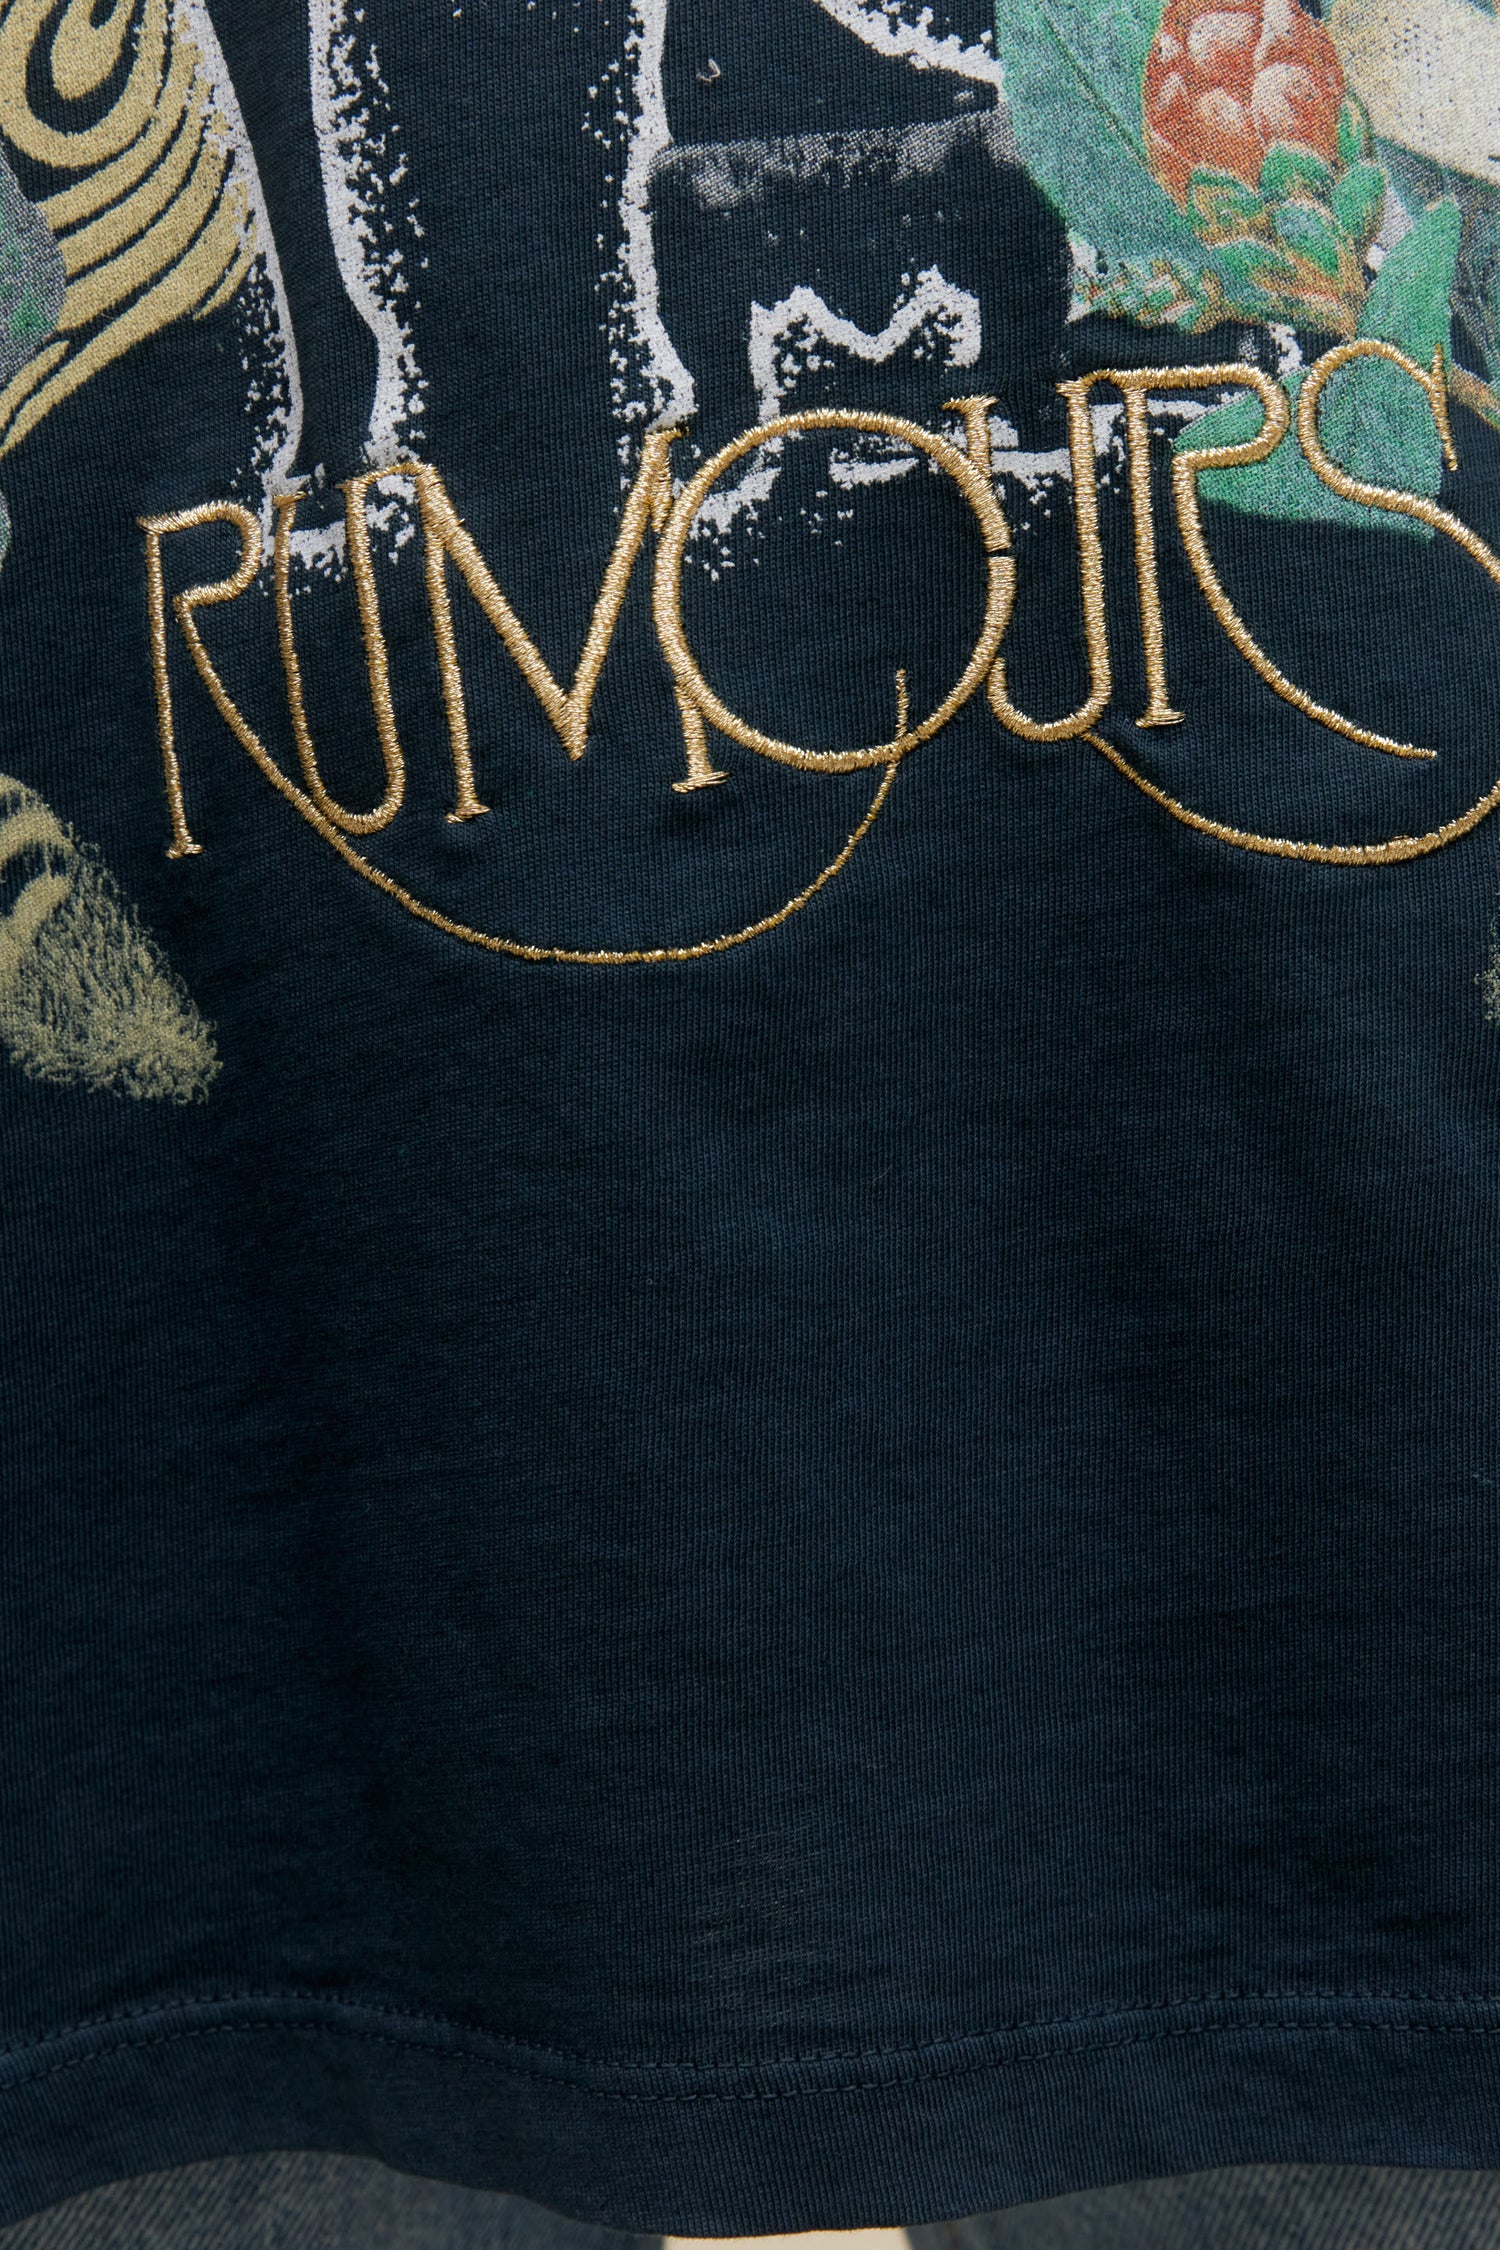 Short-haired model wearing an oversized Fleetwood Mac graphic tee with gold embroidery and floral artwork